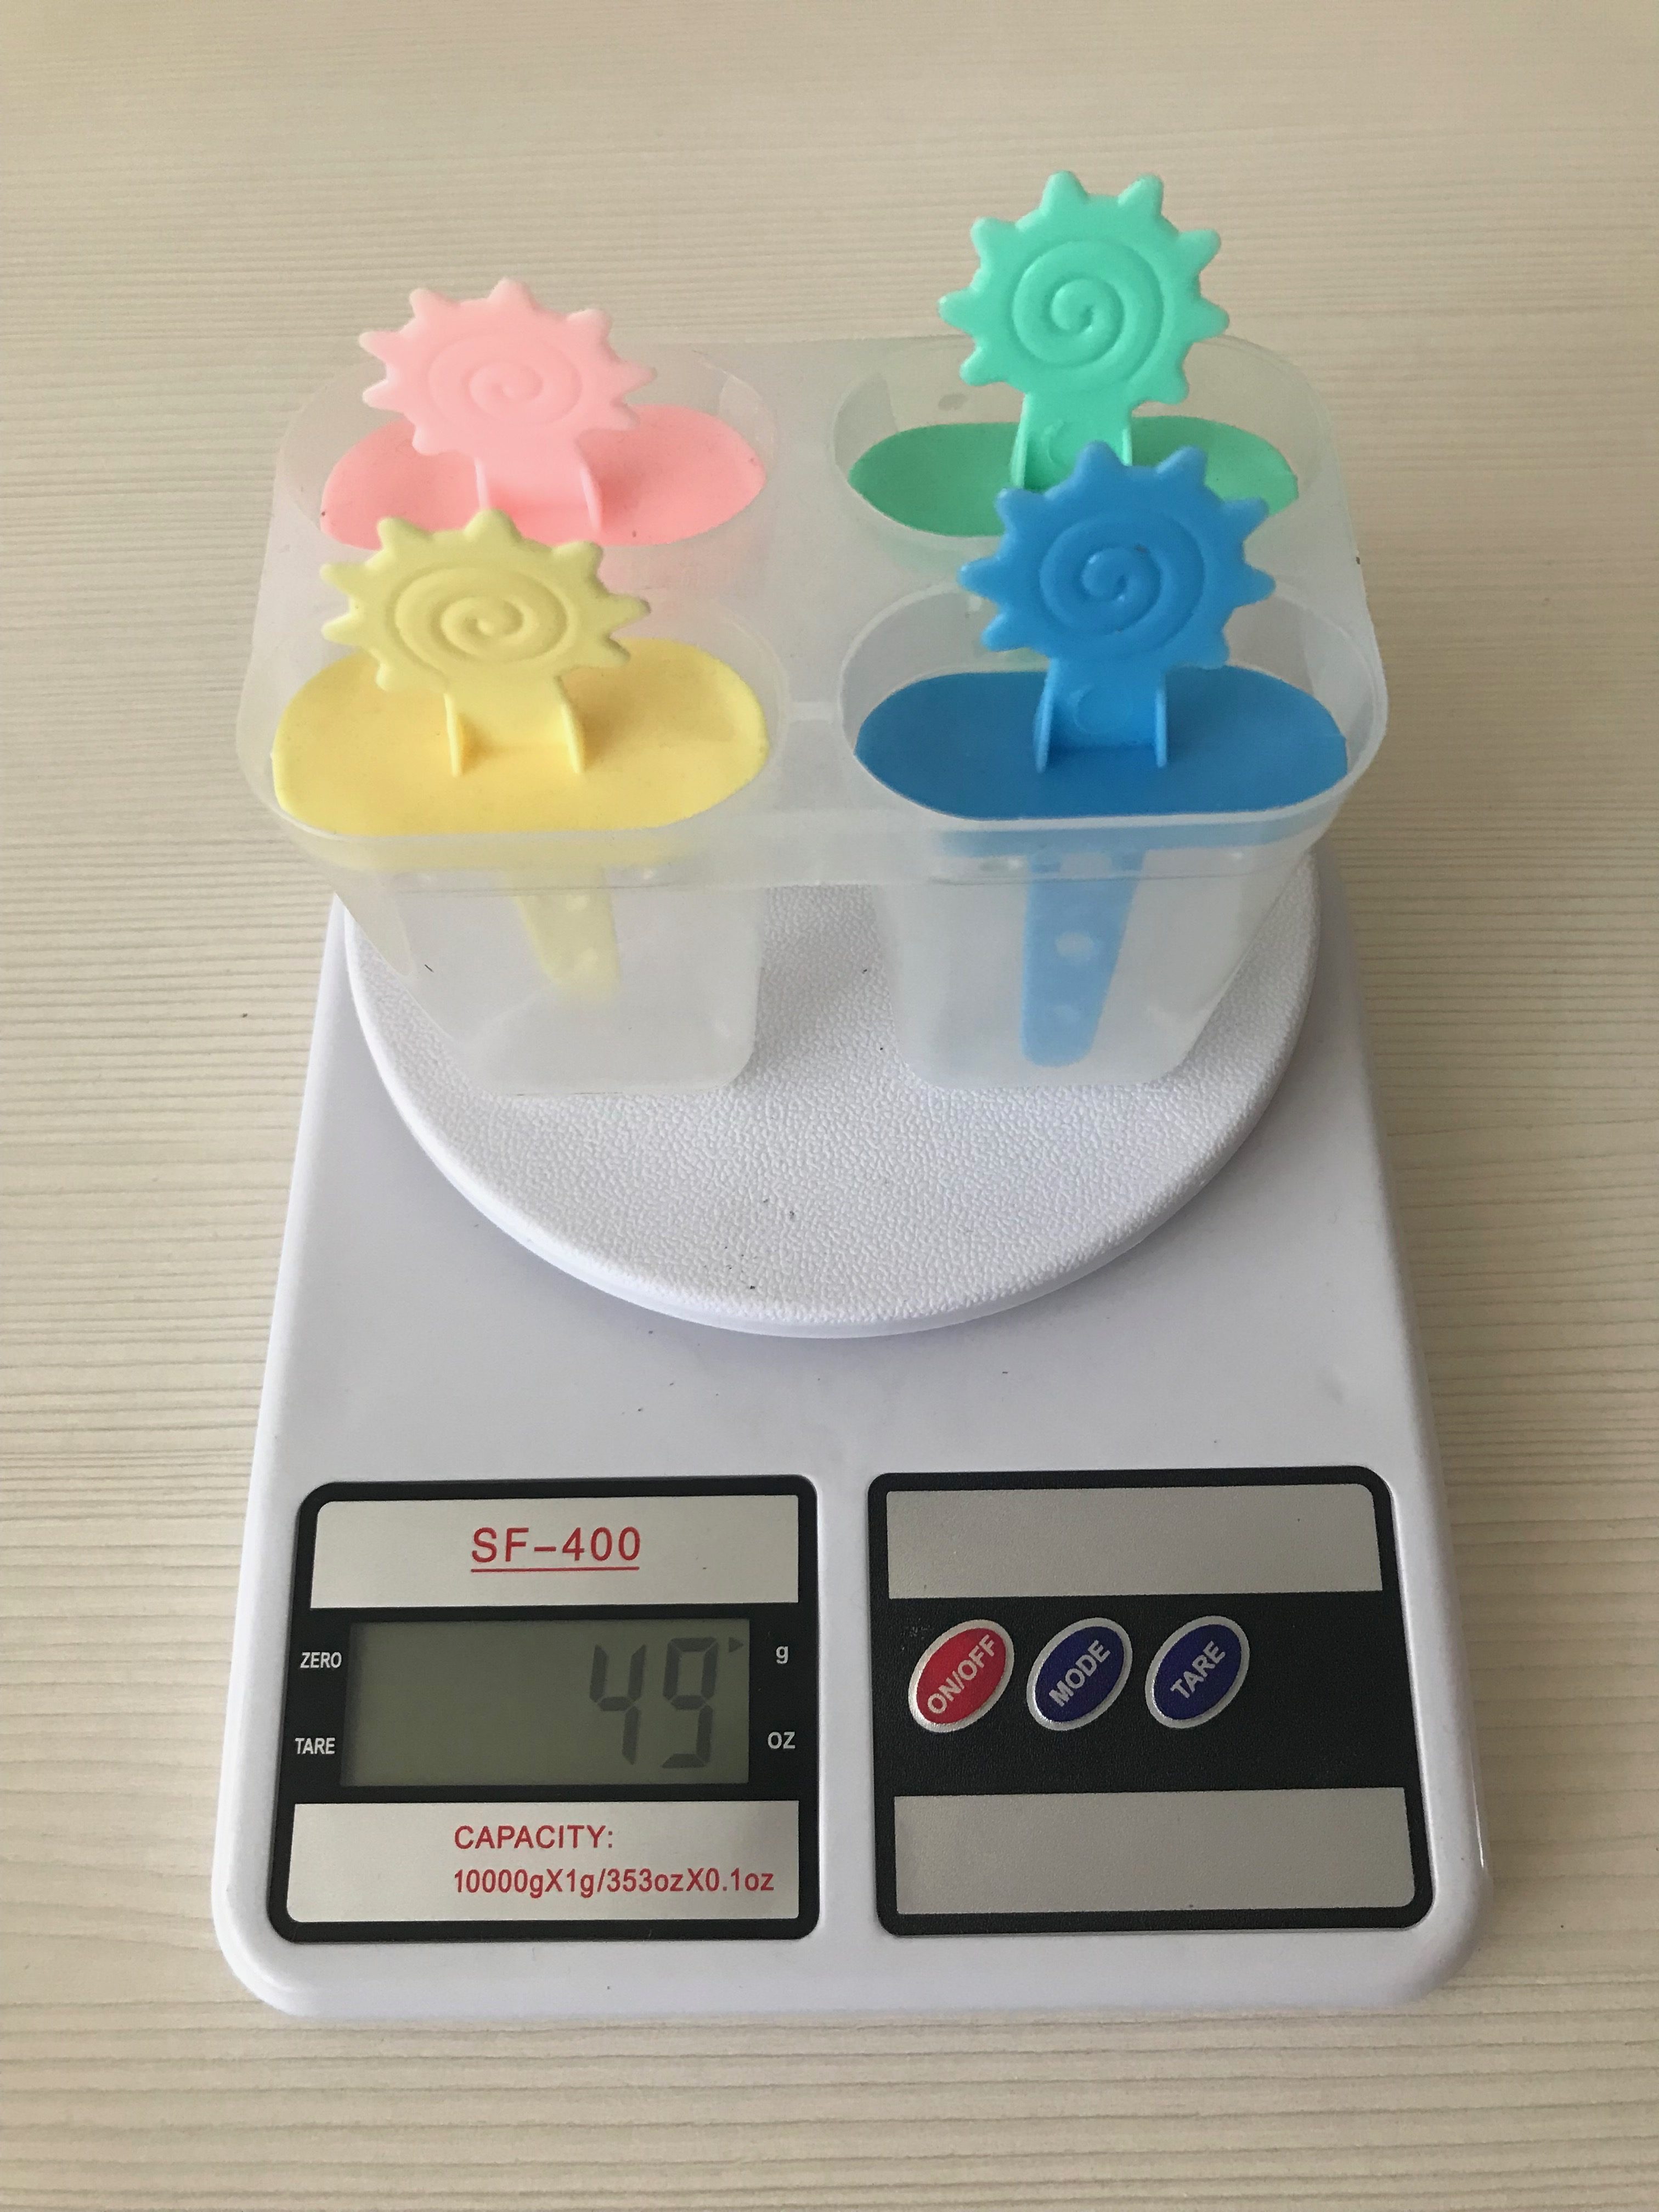 How much does an ice cream mold weigh (for 4 servings)?